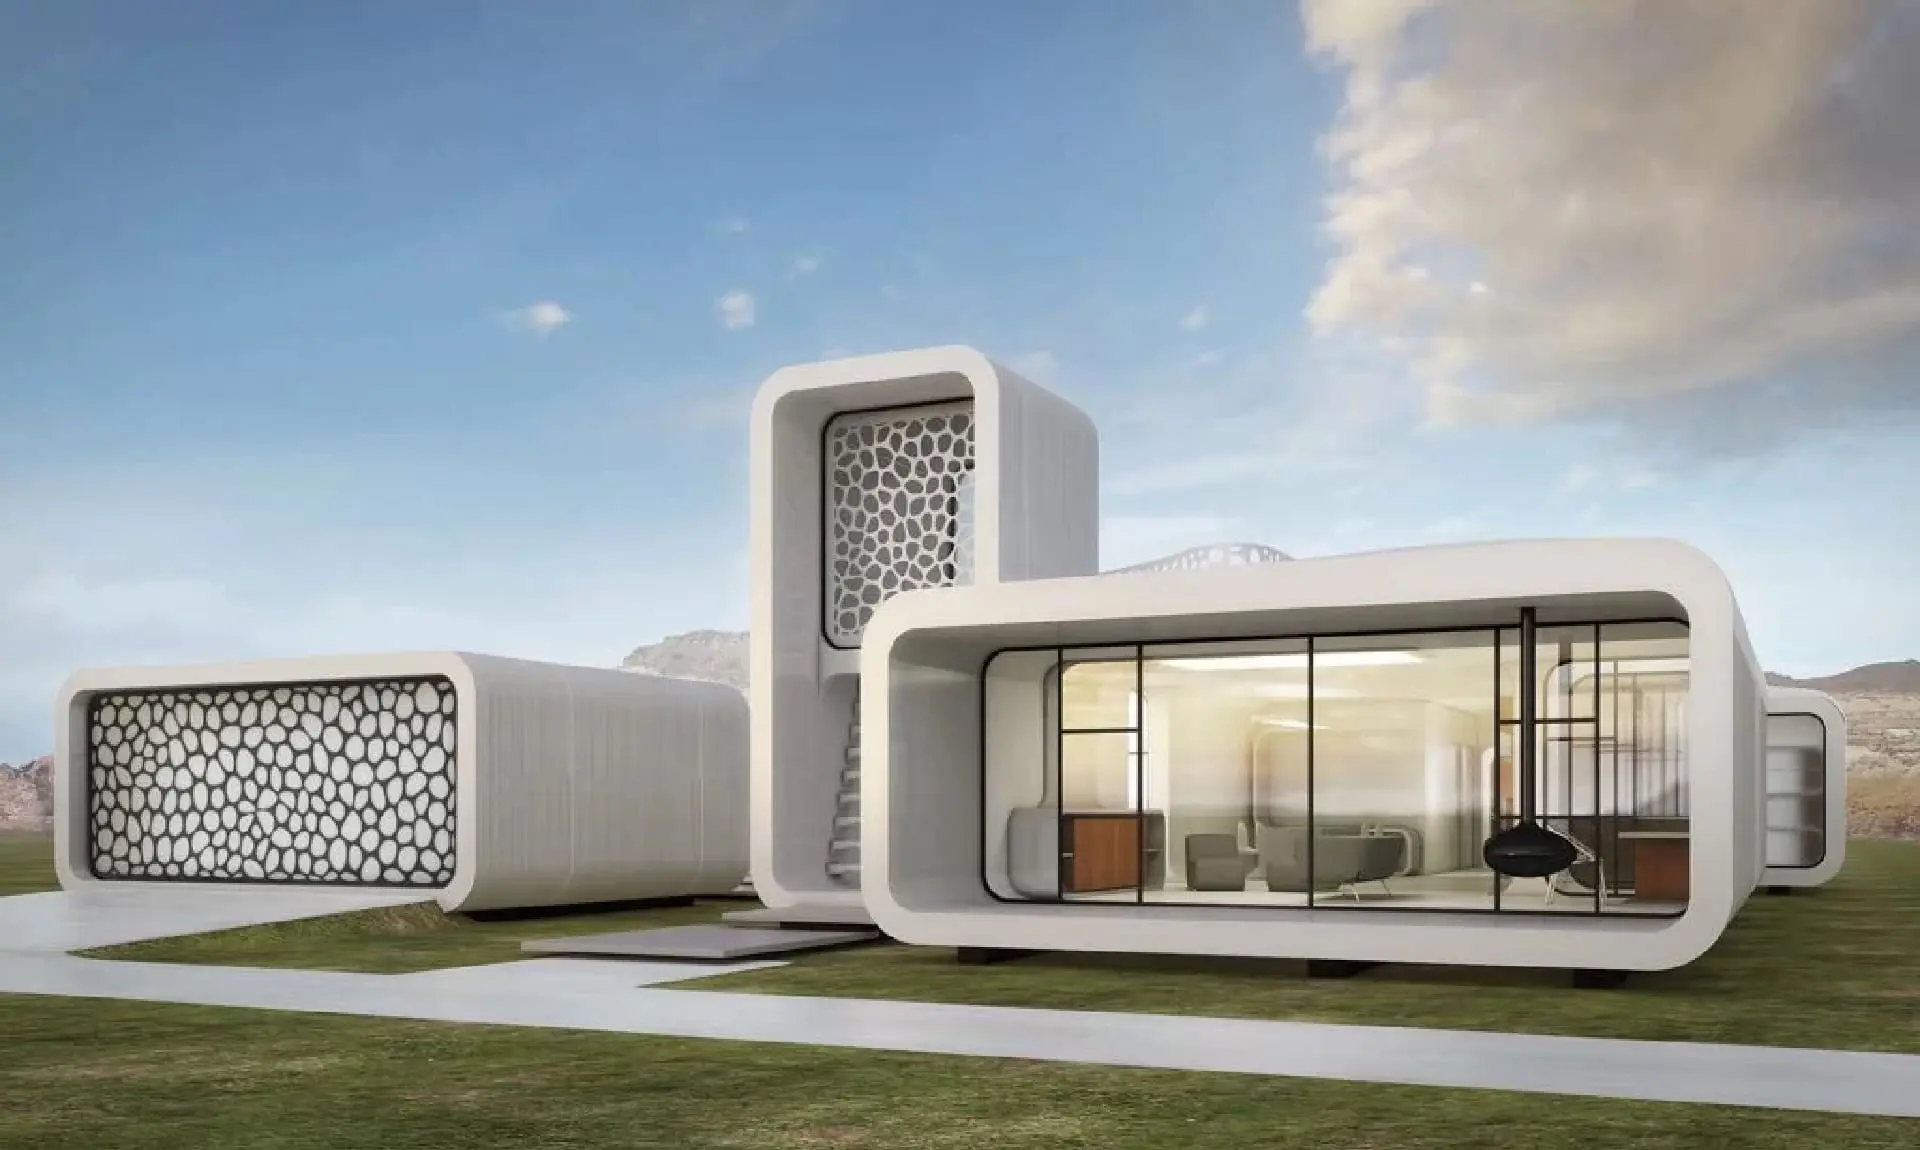 The Concept of 3D Printed Buildings